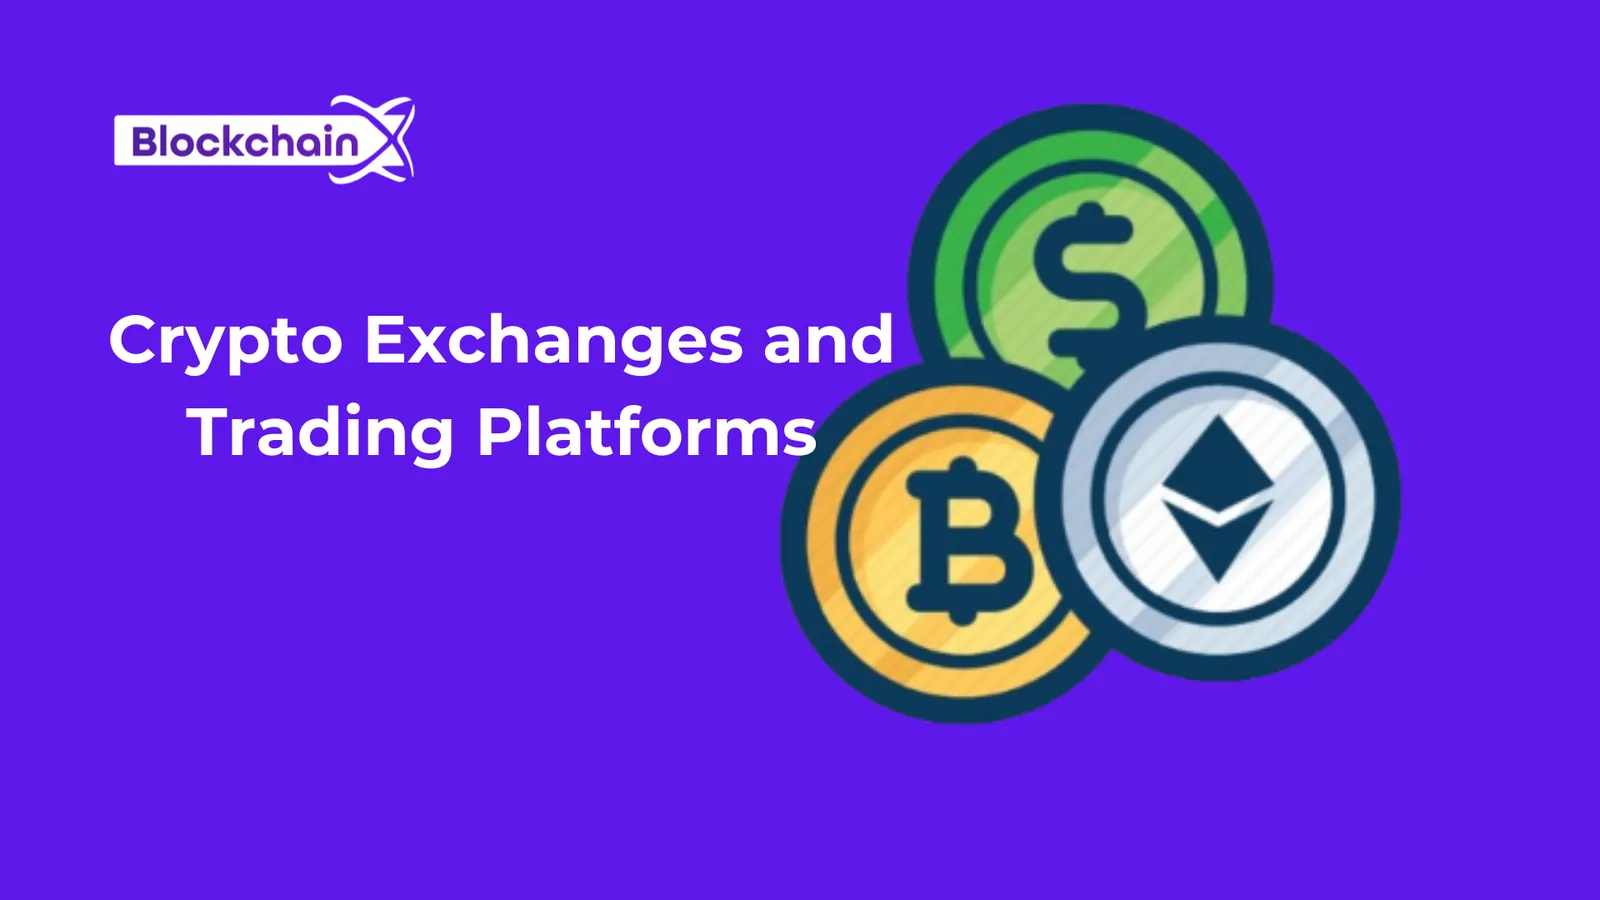 What are some good crypto exchanges and trading platforms, especially for beginners? What 